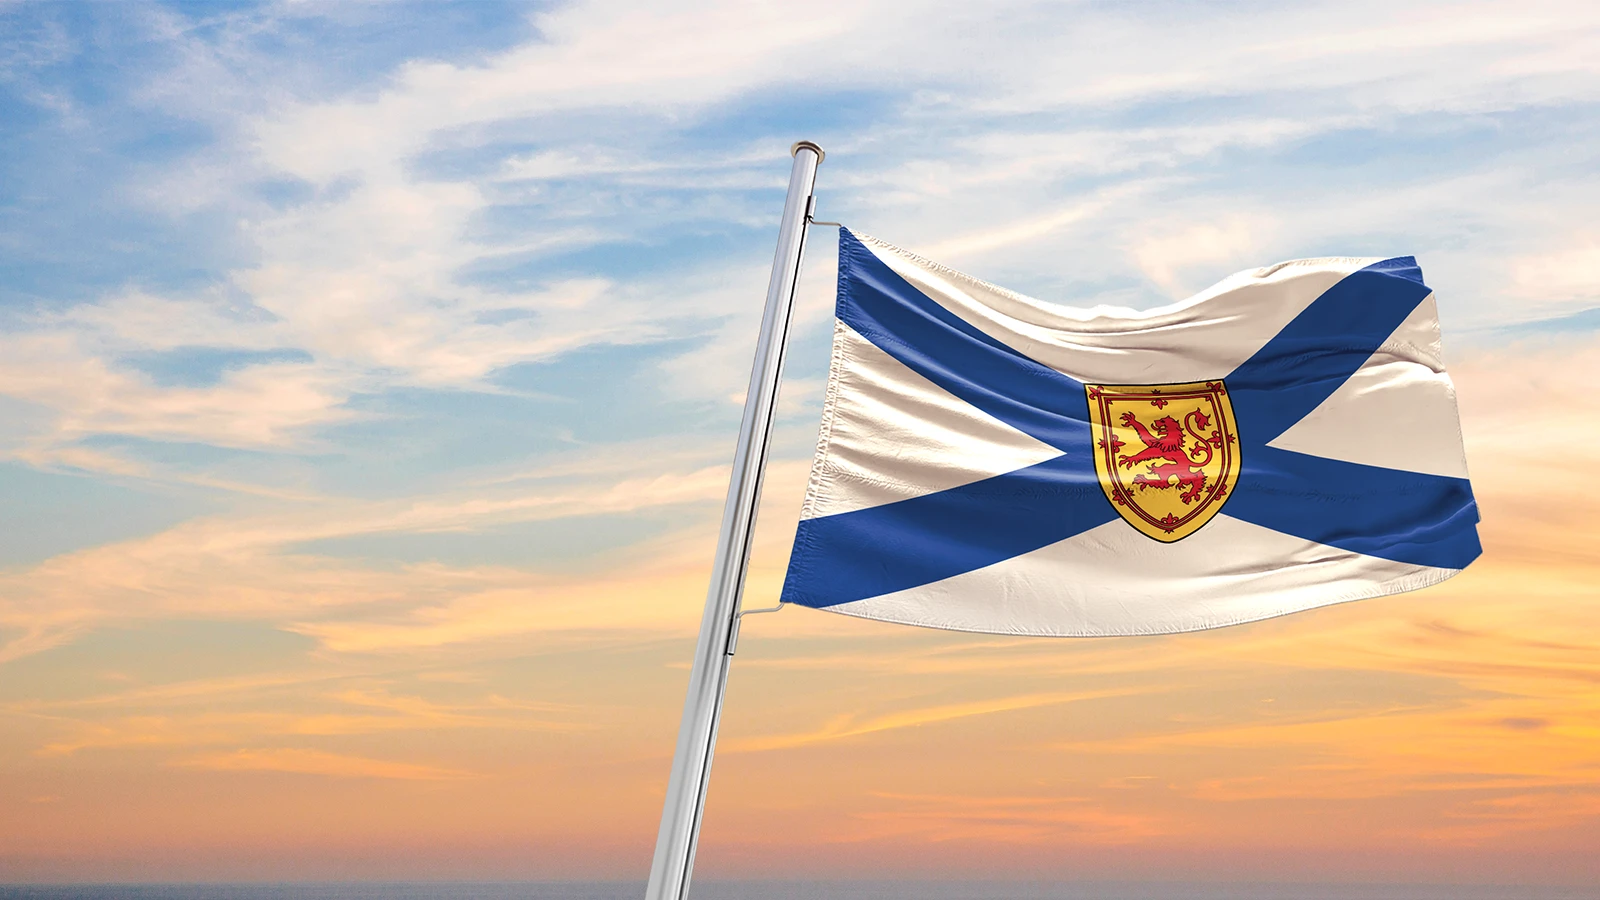 Nova Scotia flag flying on a pole with a lightly clouded blue sky background